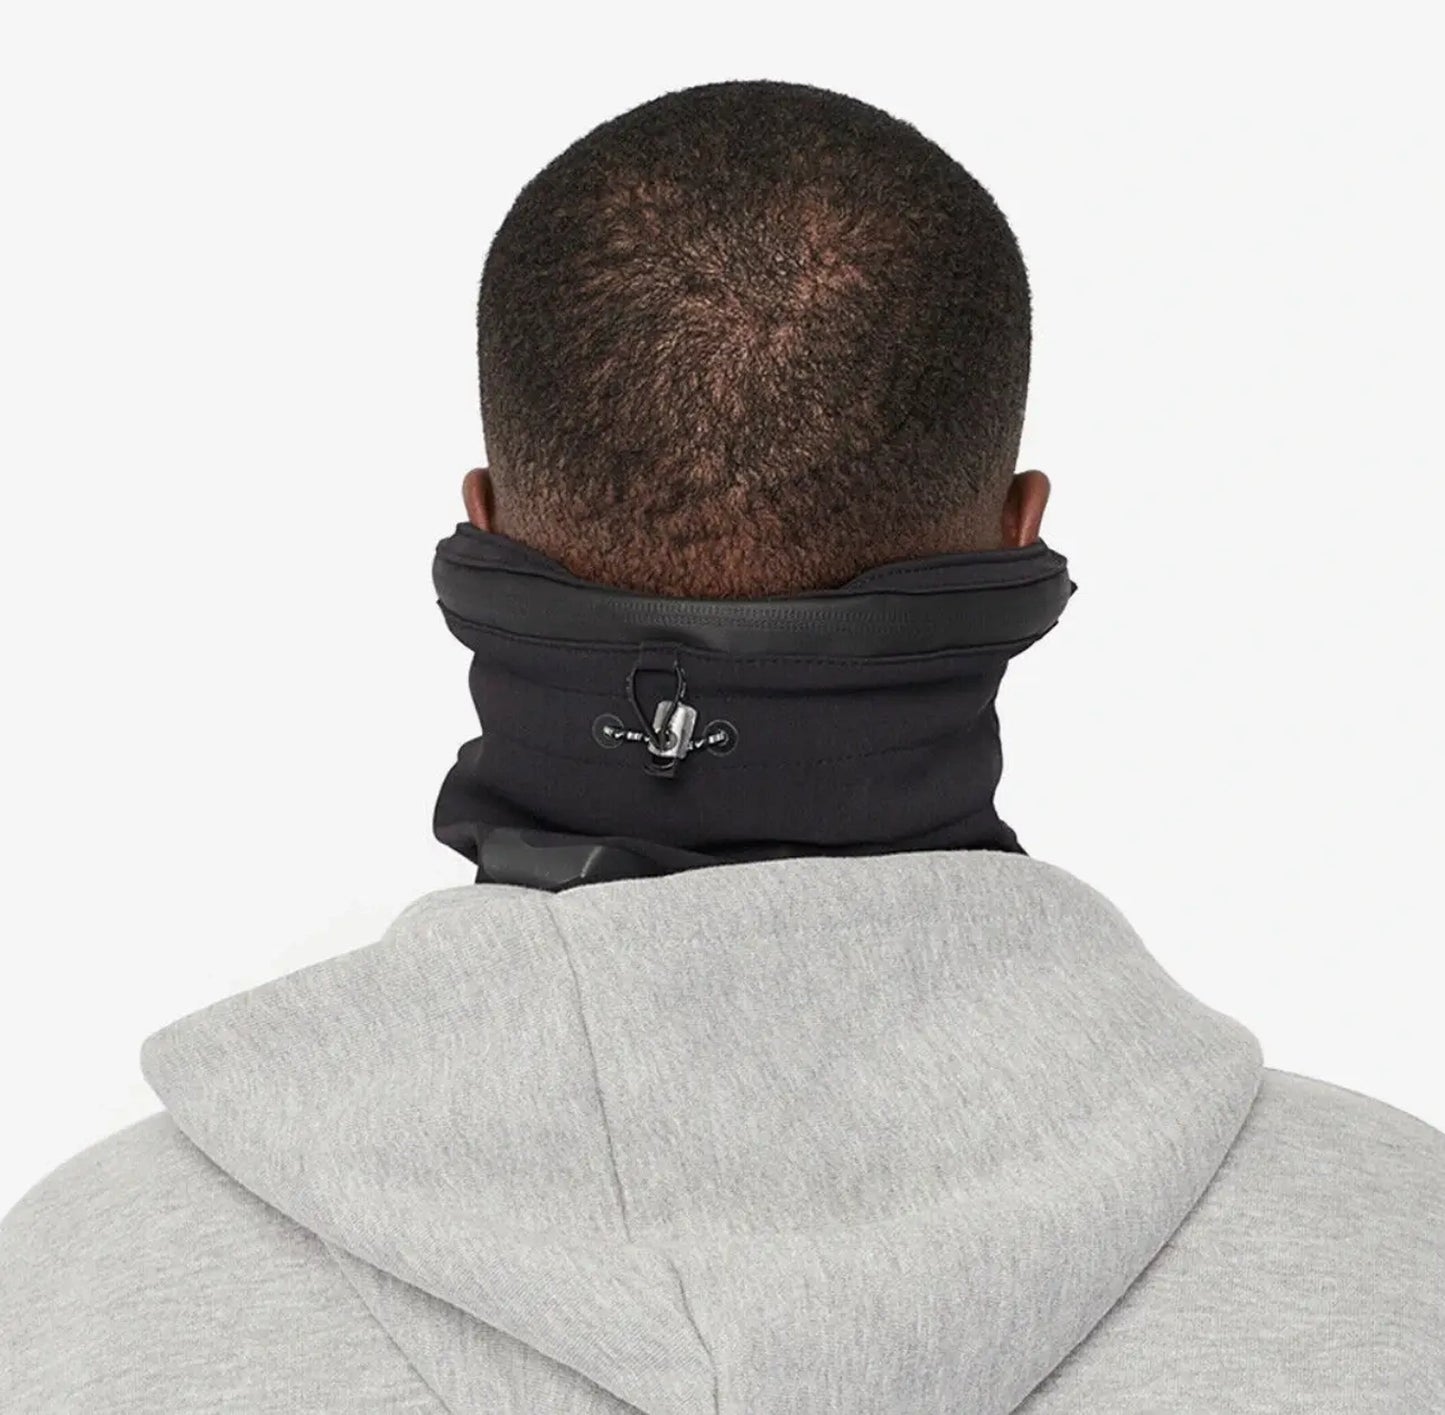 Protect you neck with this hood and face mask